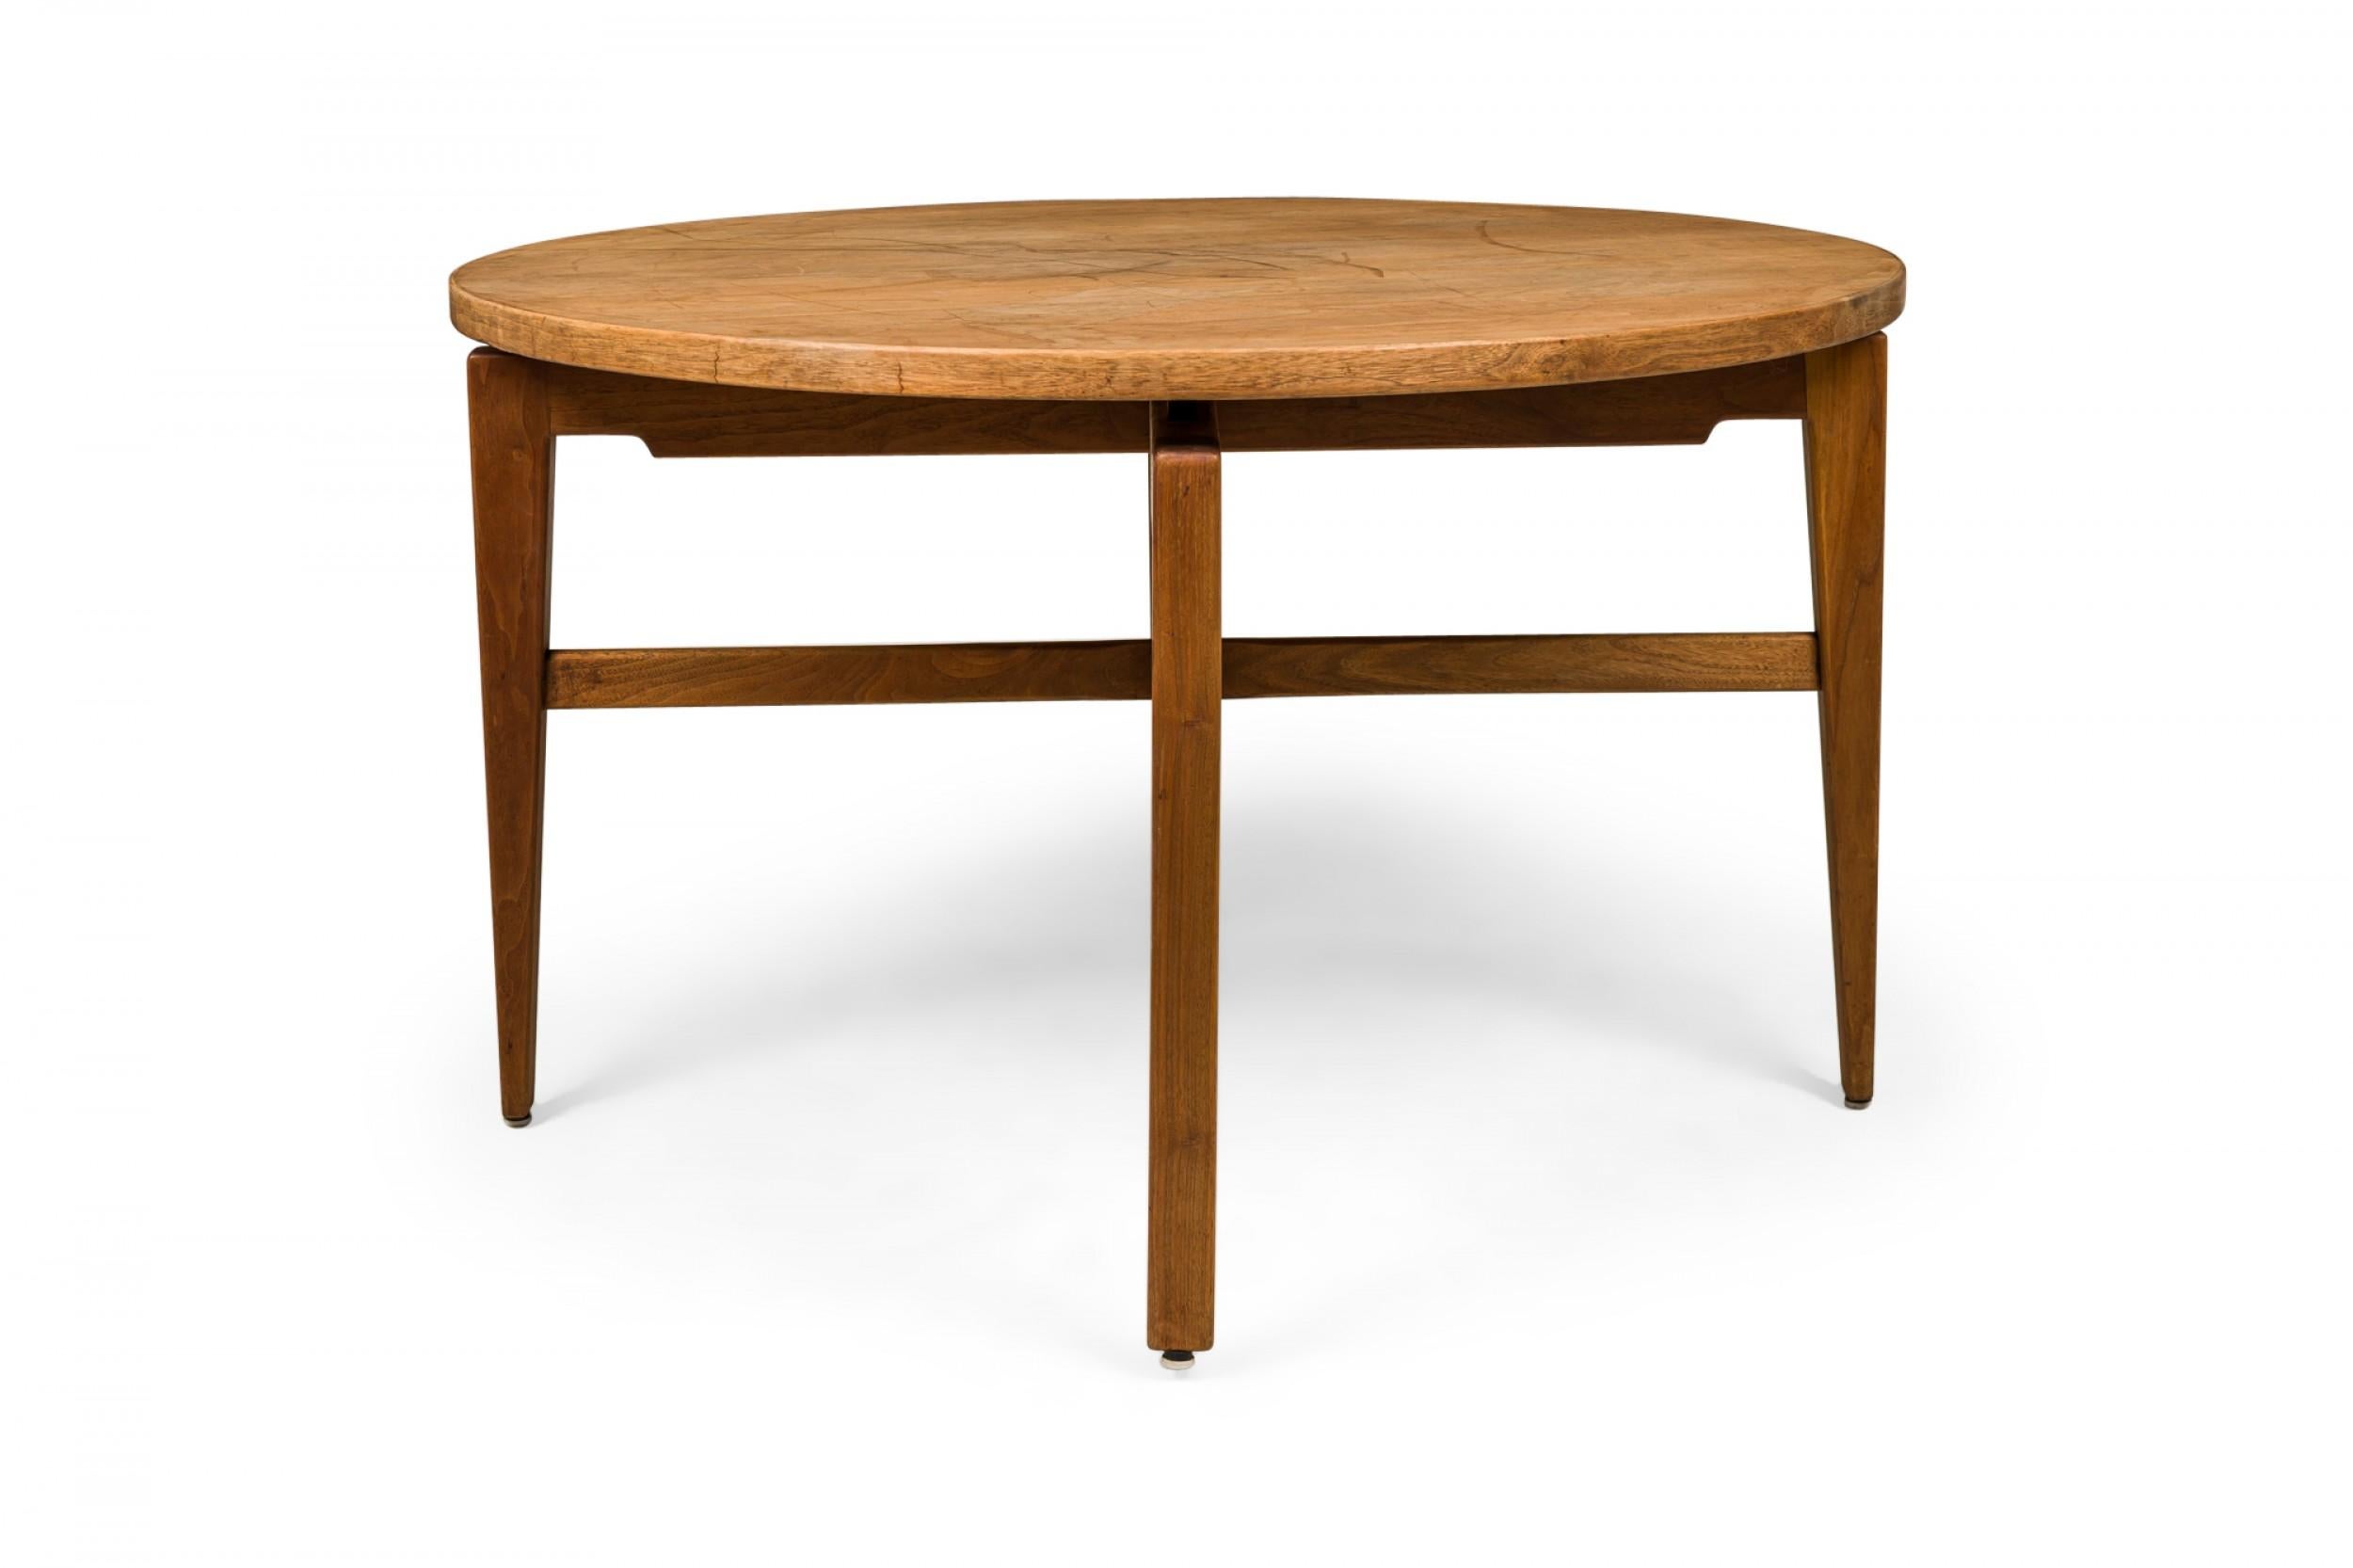 Danish Mid-Century circular walnut dining table with a rotating lazy susan top resting on an X-shaped walnut base with tapered square legs. (JENS RISOM)(Similar tables: DUF0276, DUF0277, DUF0279)
